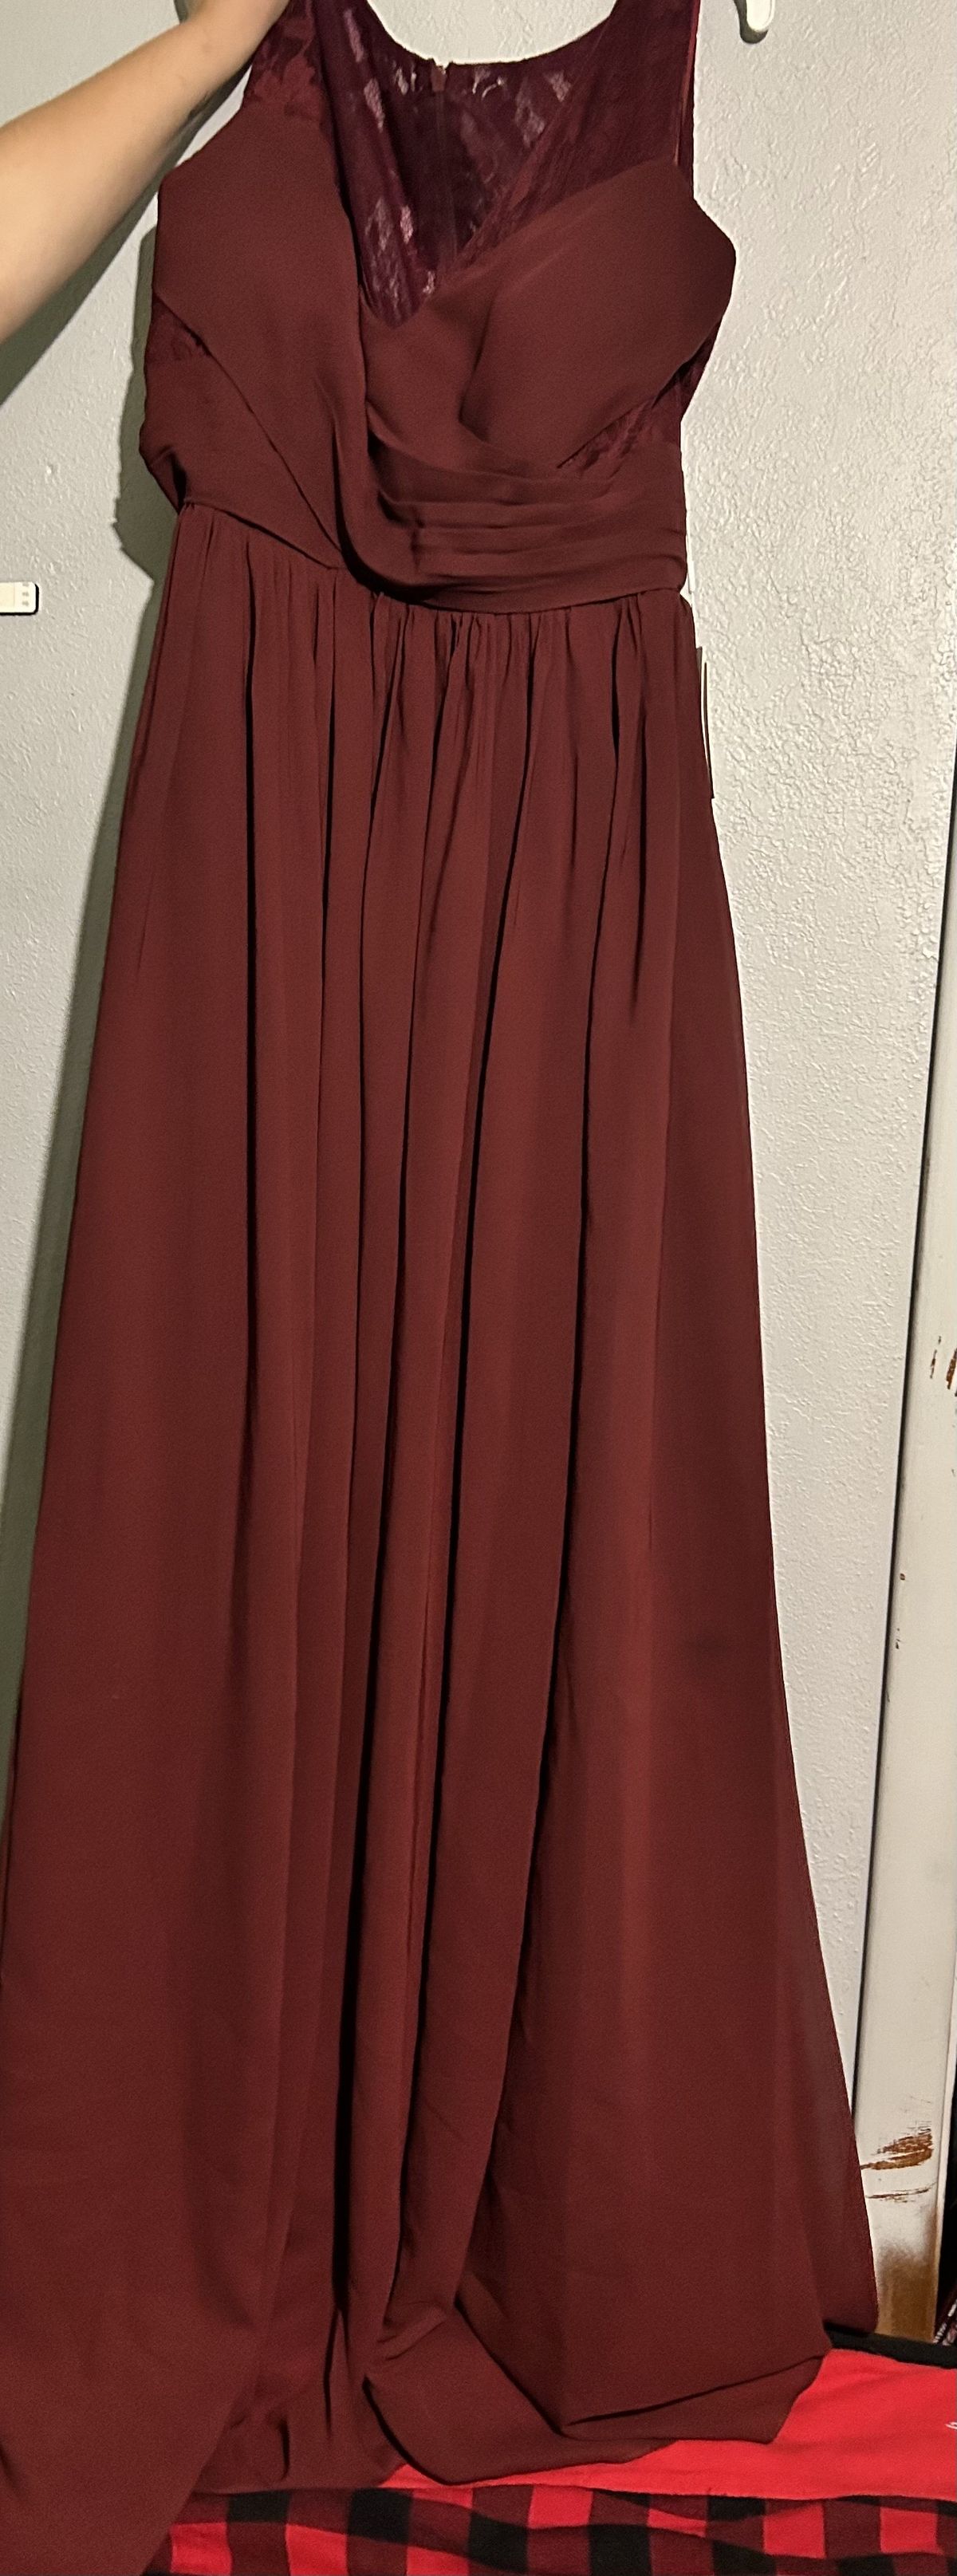 Plus Size 16 Bridesmaid Red A-line Dress on Queenly